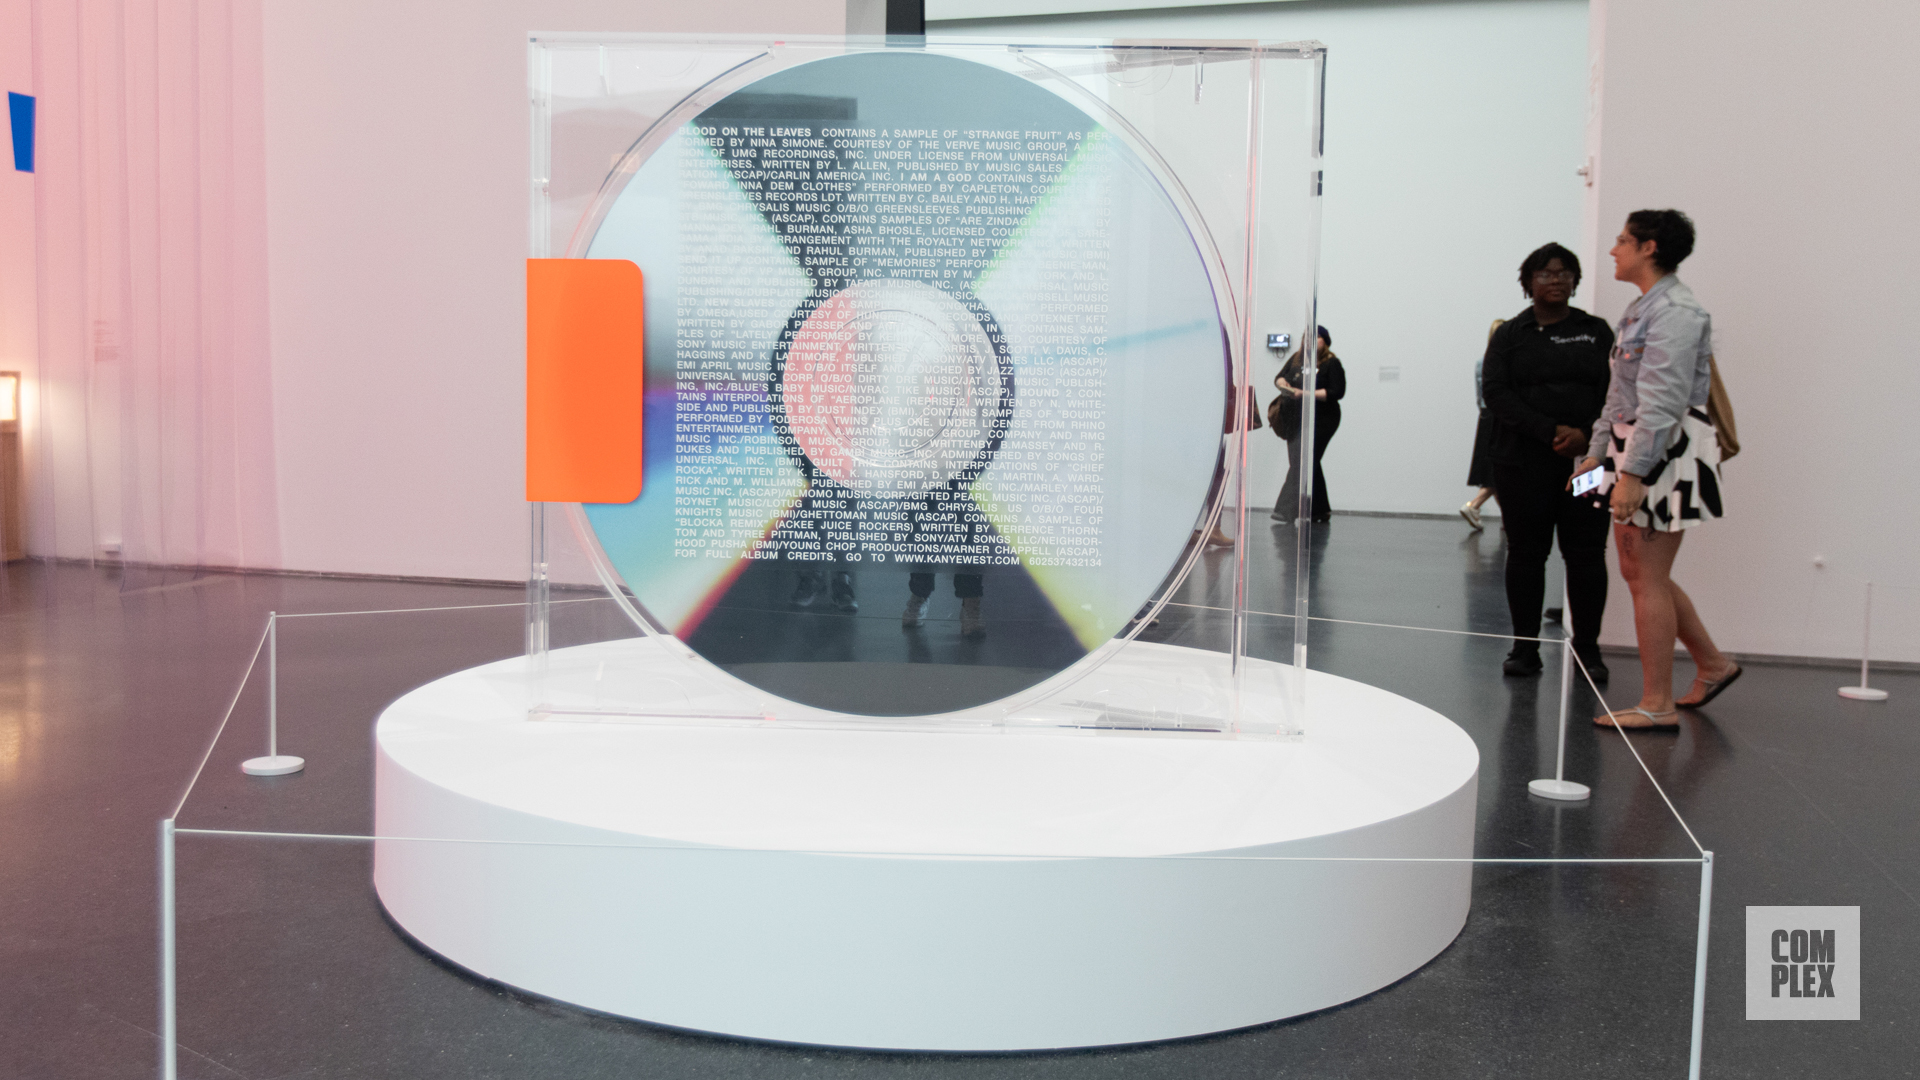 The museological book of the exhibition 'Virgil Abloh: Figures of Speech',  MCA Chicago (10 Jun - 22 Sept 2019)